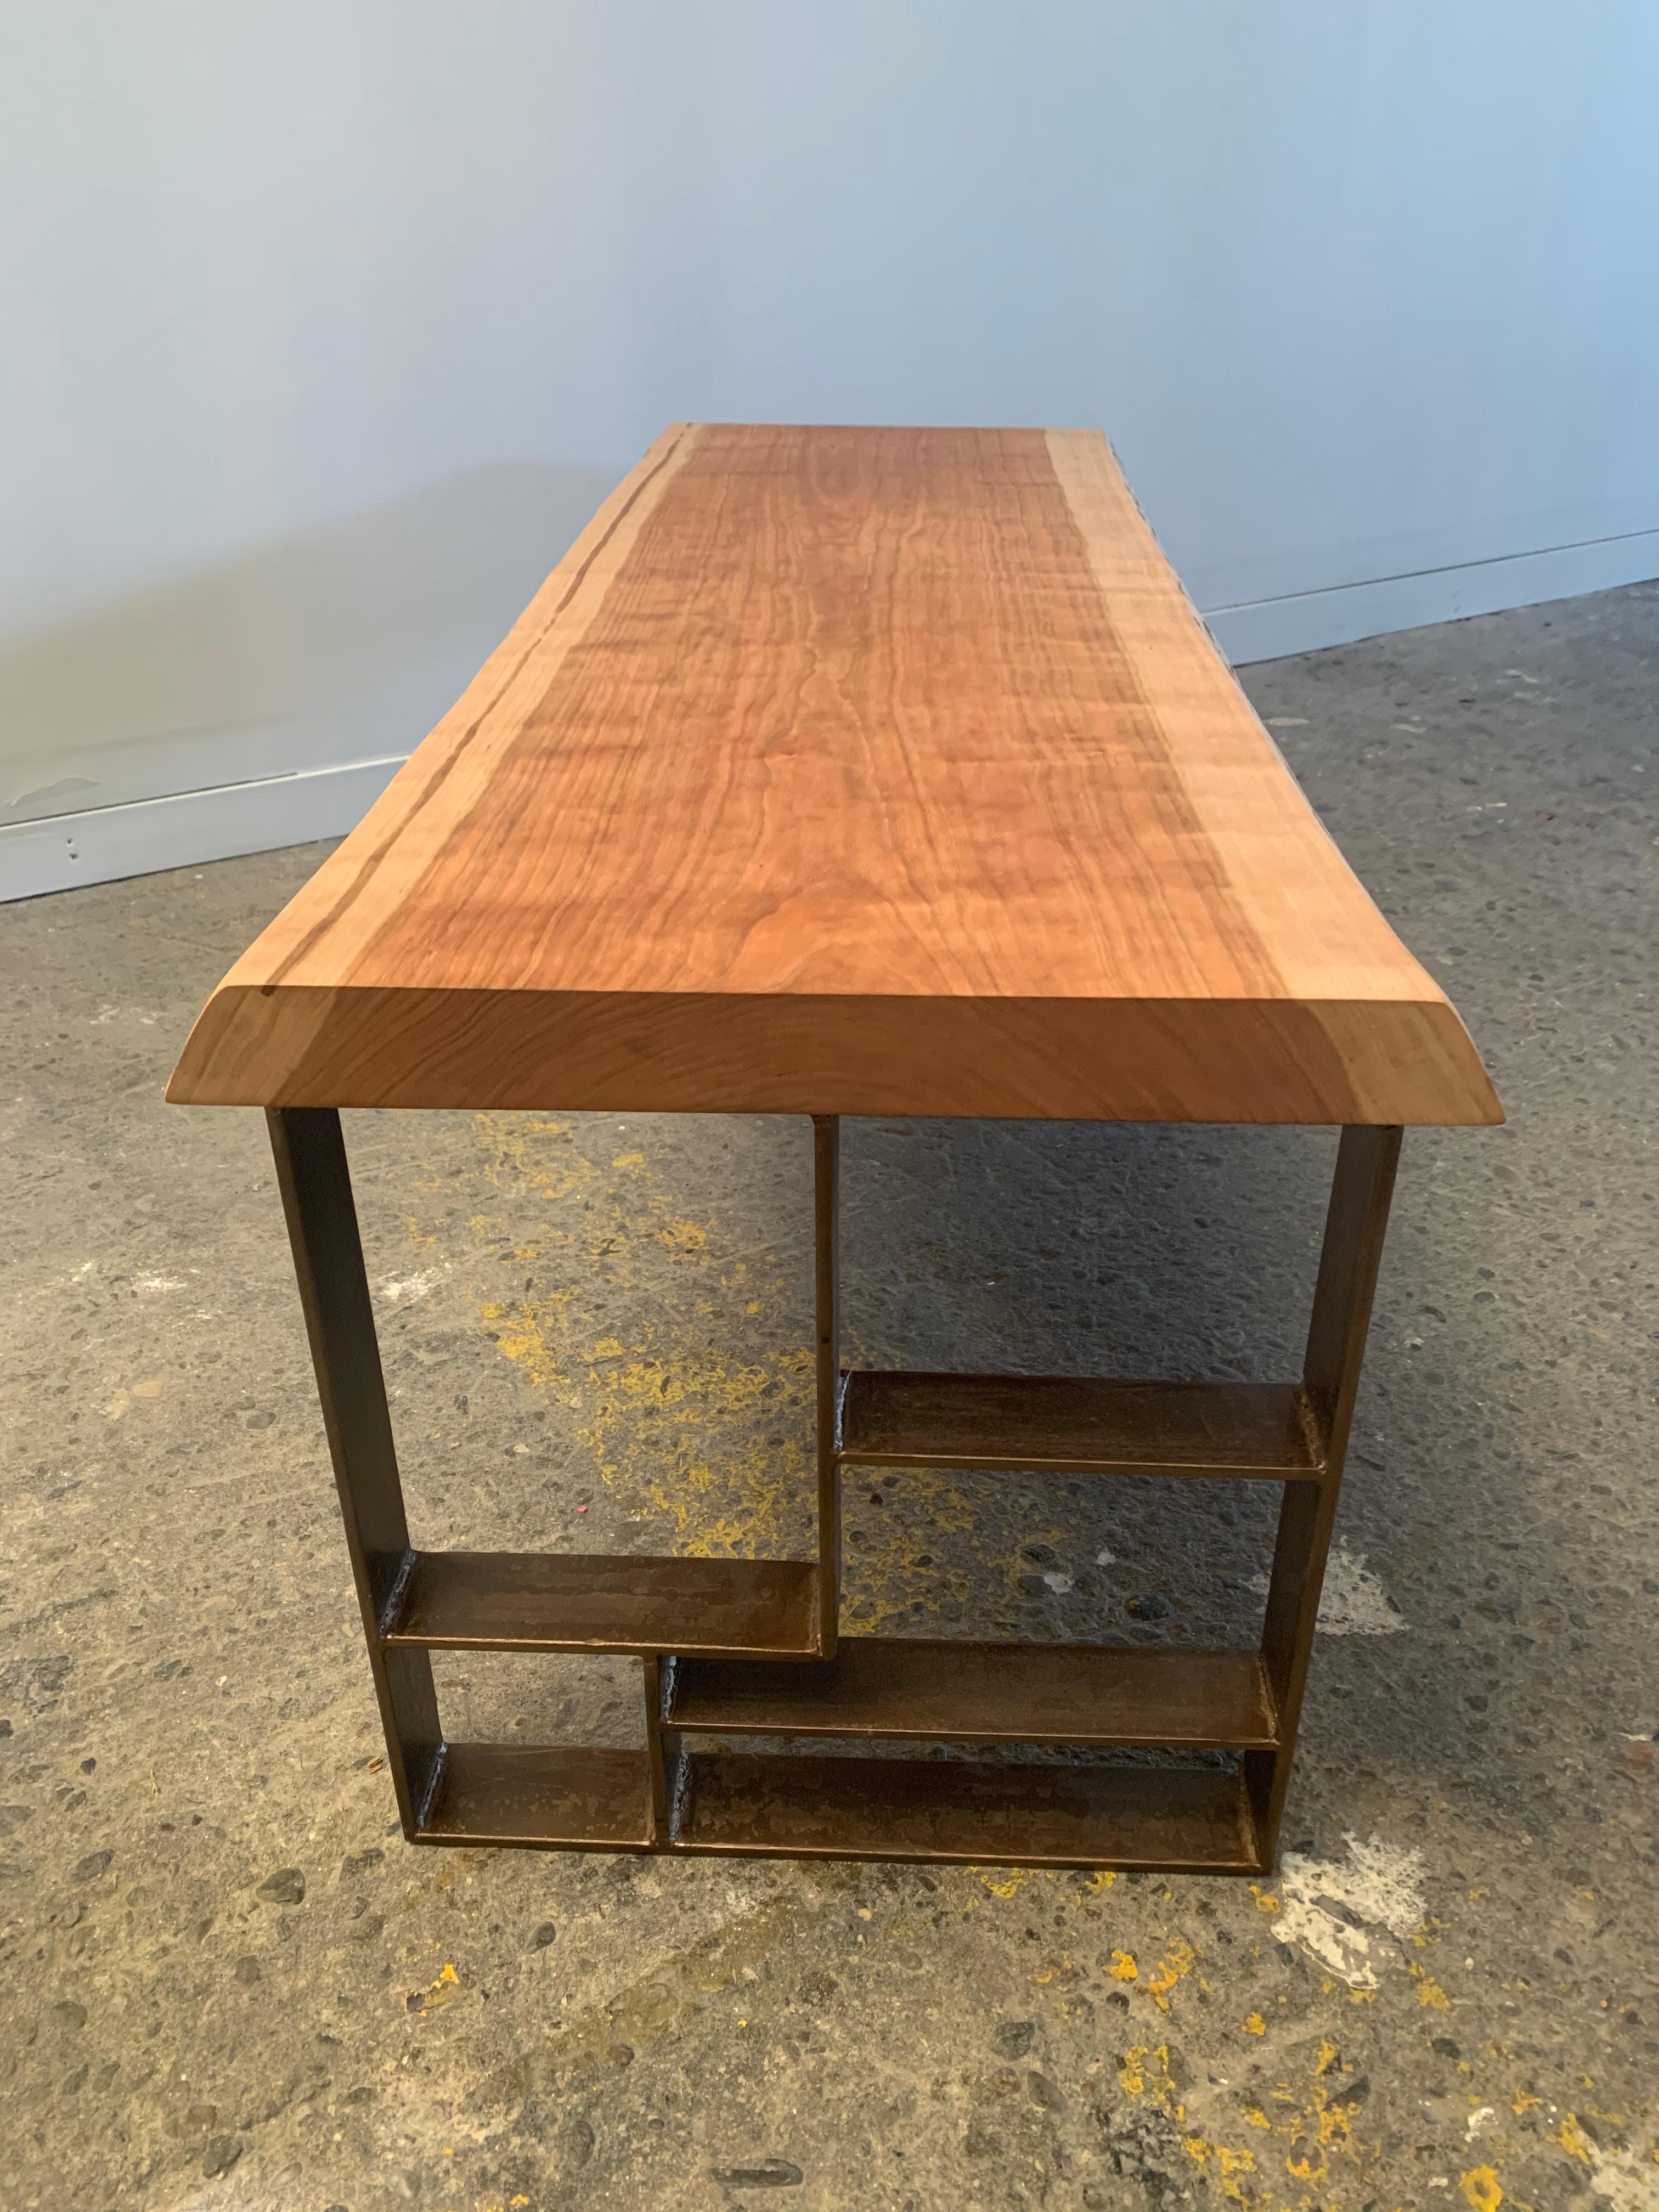 Handcrafted, natural cherrywood coffee table. The slab surface rests upon the handcut and welded steel base. A versatile steel magazine rack is seamlessly tucked under the table top further fortifying this rugged yet refined piece.

This piece is